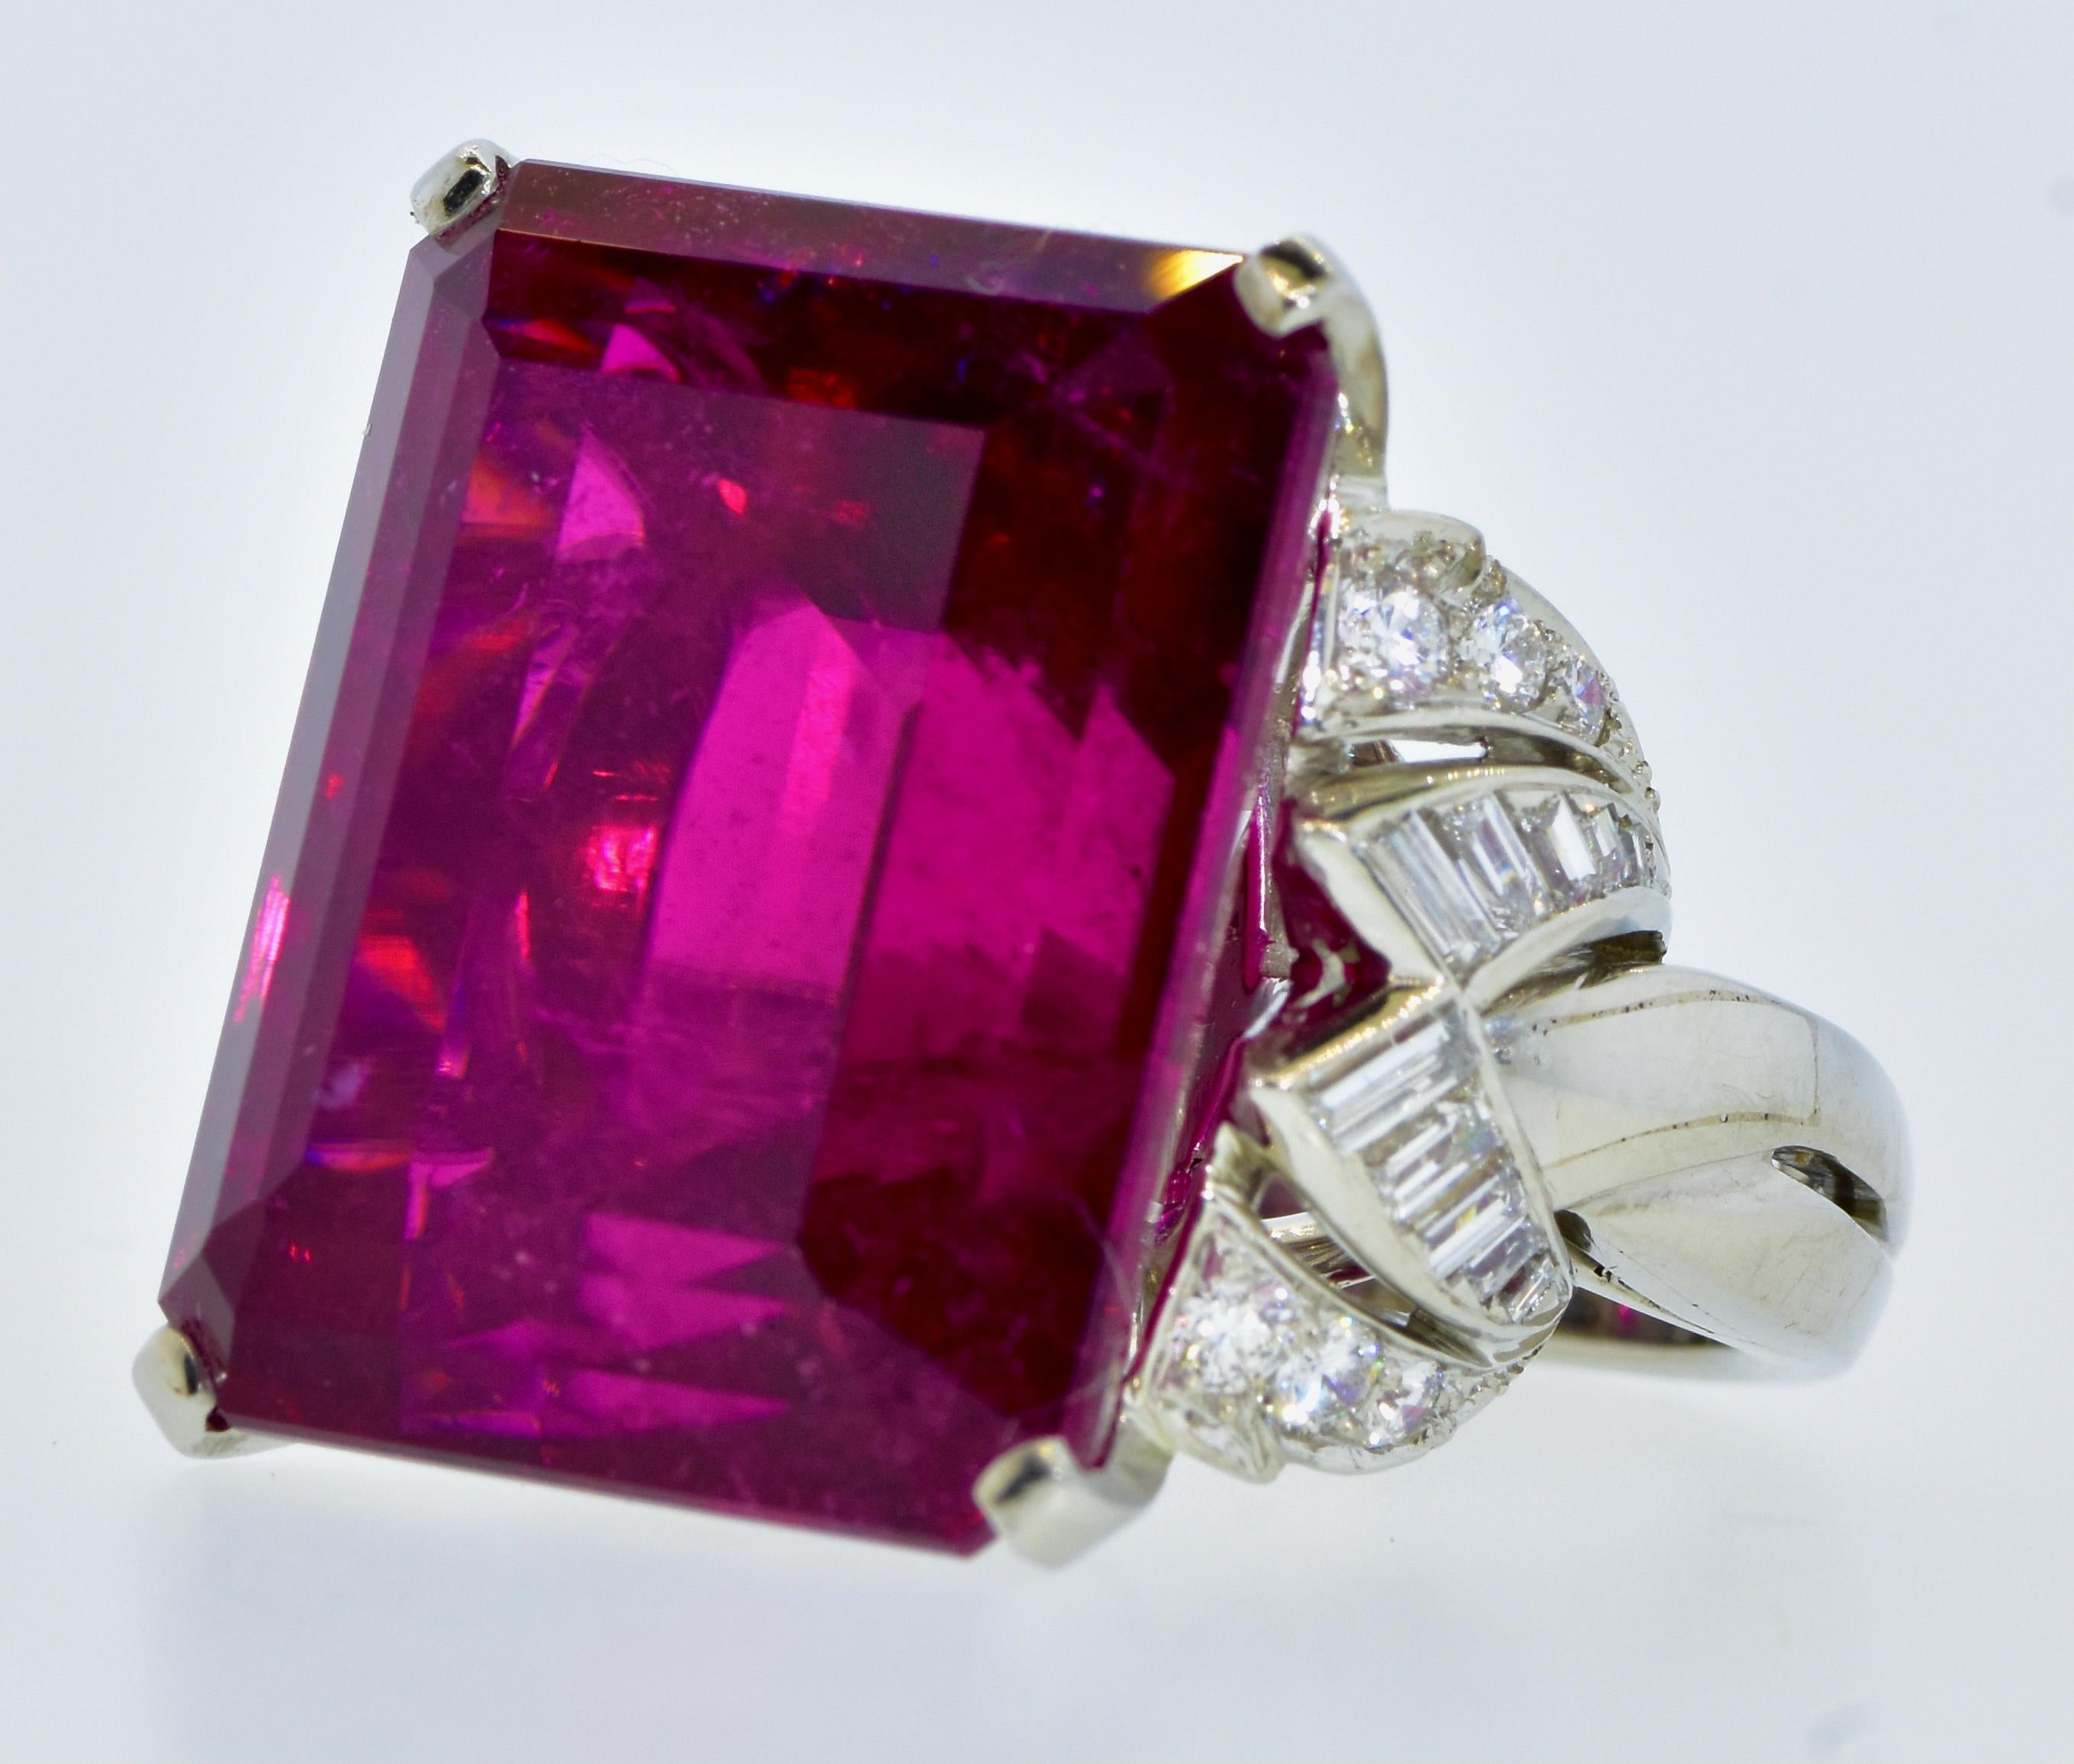 This vintage ring centers a natural rubellite (red tourmaline) weighing an estimated 38.5 cts., and measuring 20.8 mm. by 16.85 mm by 12.75 mm.  In terms of inches, this emerald cut stone measures about 13/16 inches (a bit more than three quarters